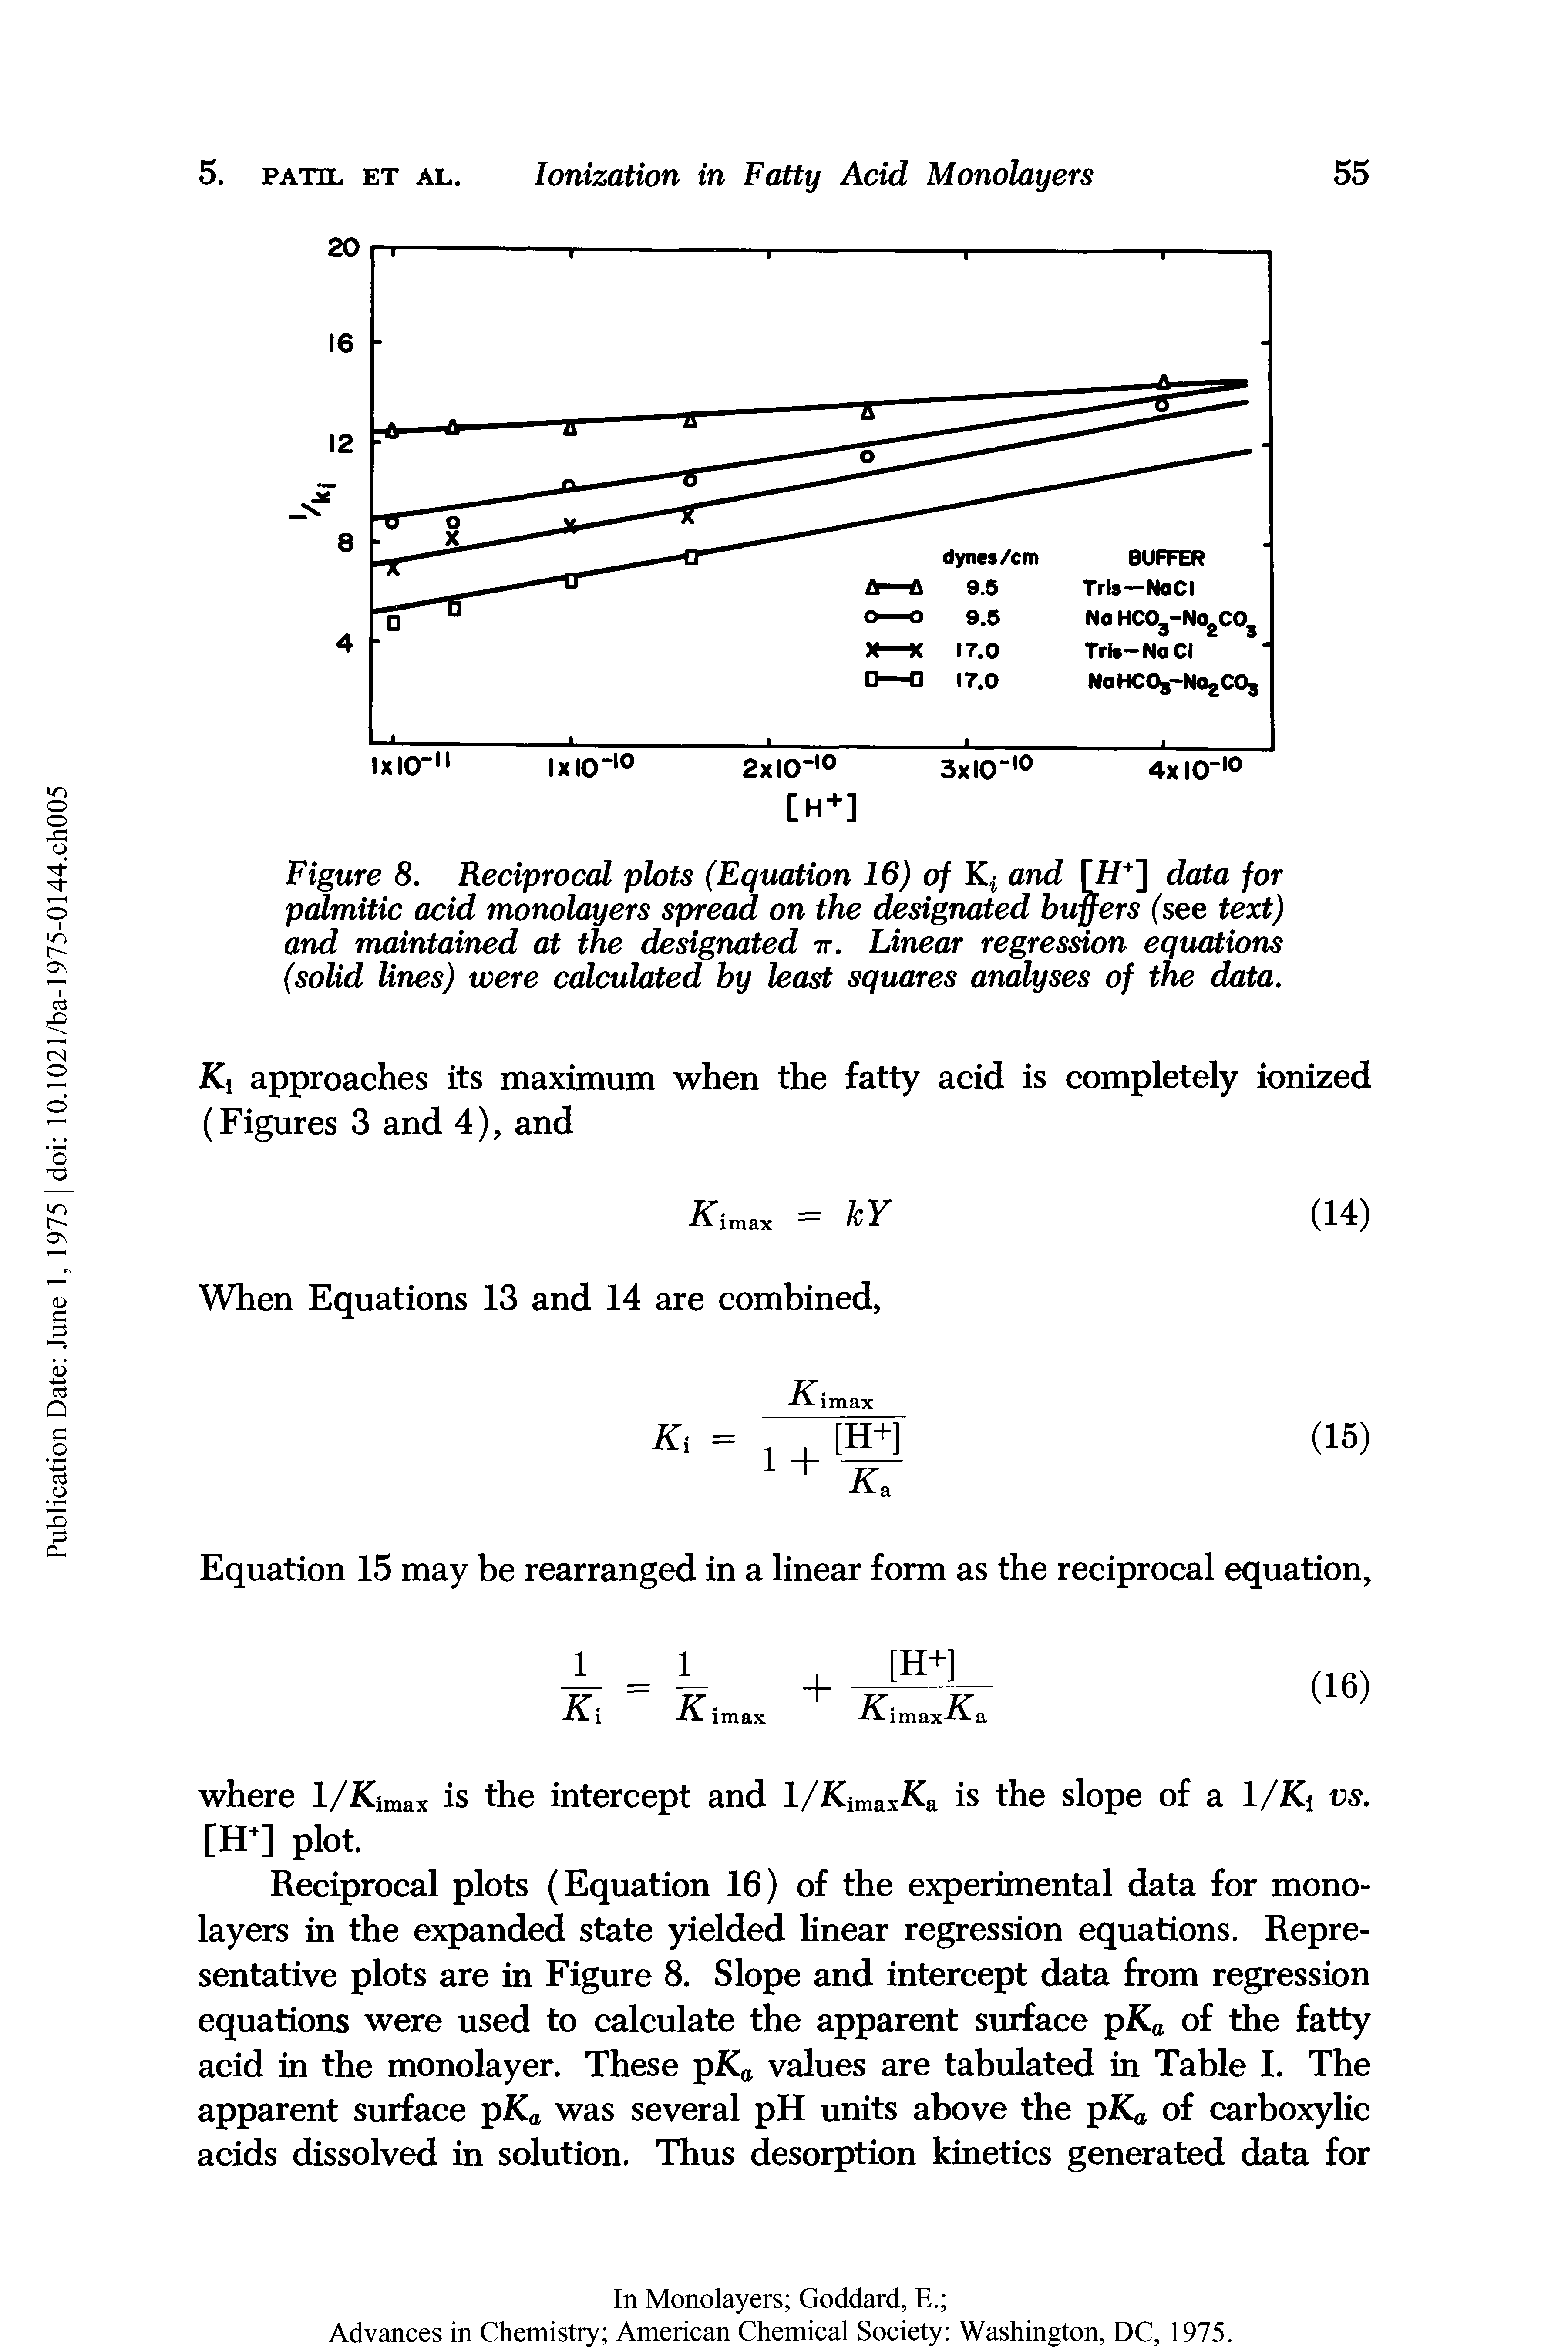 Figure 8. Reciprocal plots (Equation 16) of Ki and [H+] data for palmitic acid monolayers spread on the designated buffers (see text) and maintained at the designated tt. Linear regression equations (solid lines) were calculated by least squares analyses of the data.